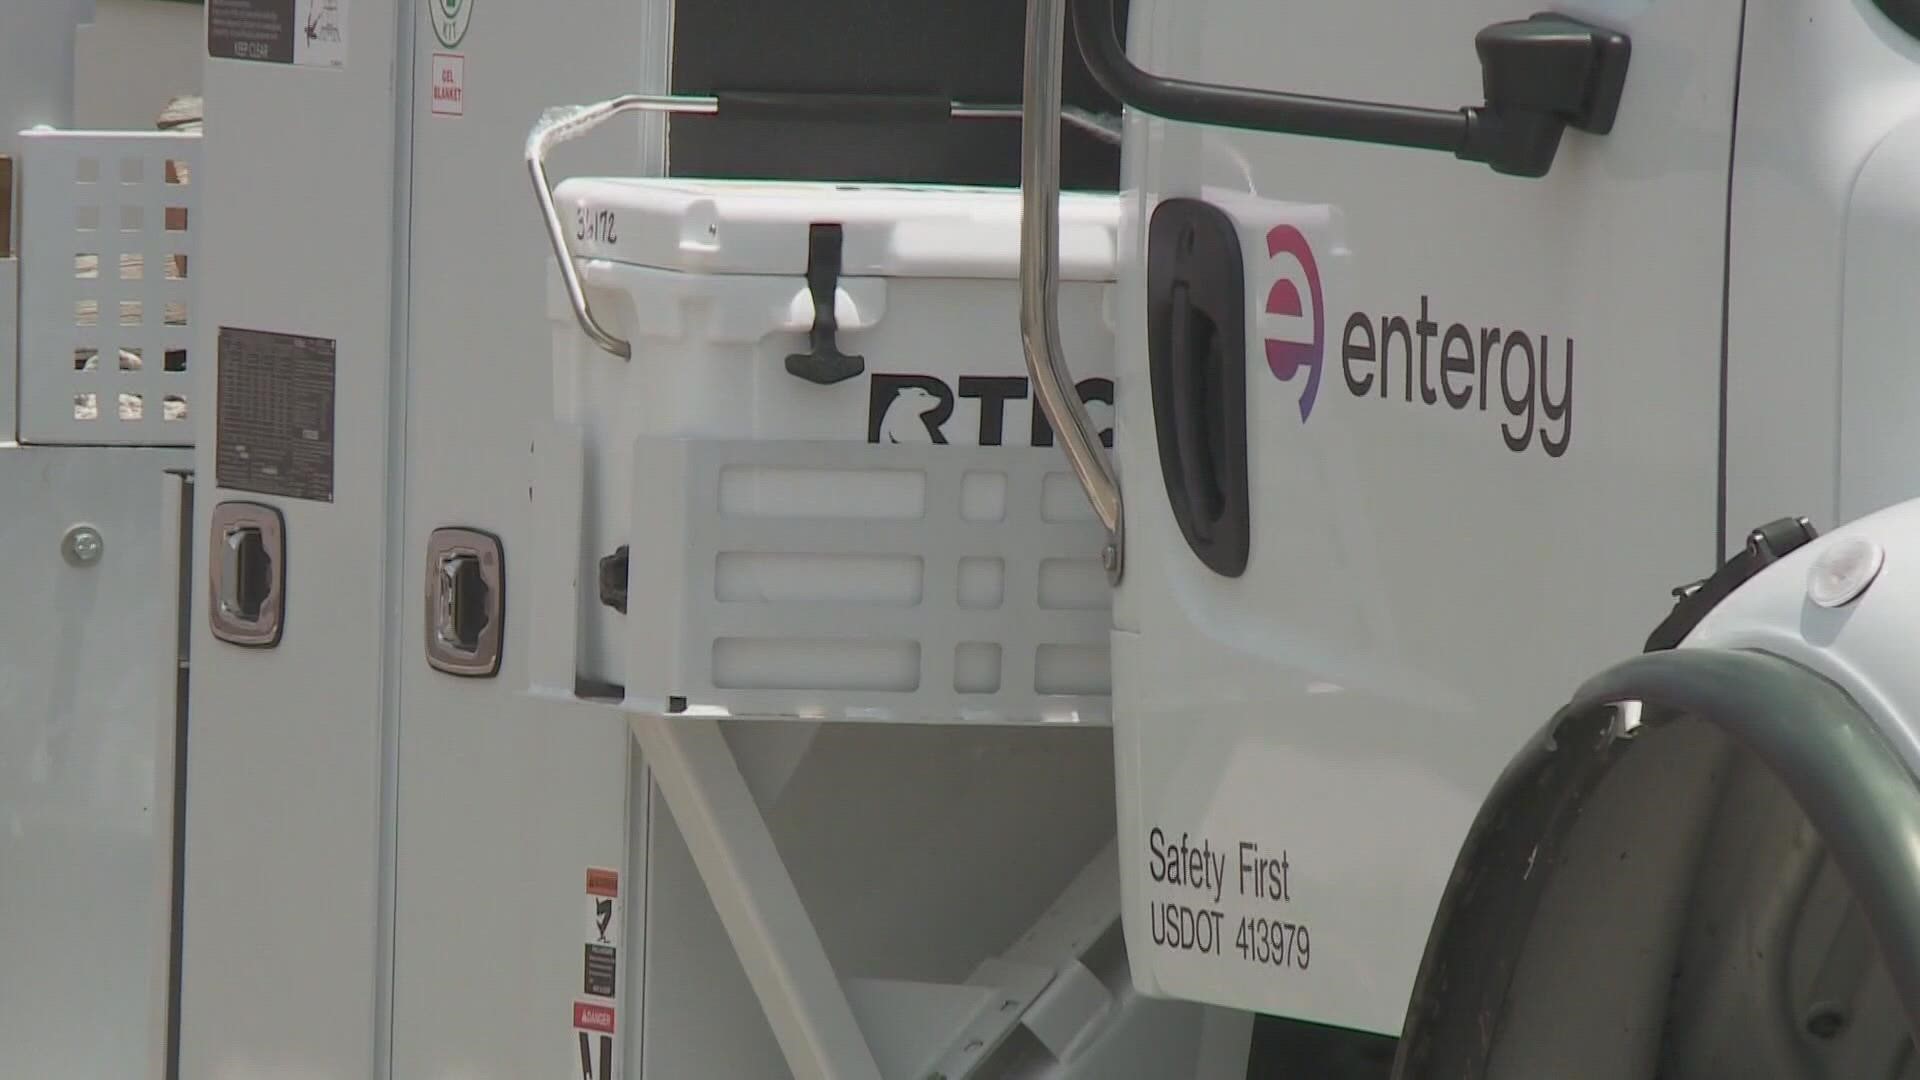 Entergy said they’re “doing this to avoid MISO from ordering power outages to balance supply and demand across their entire footprint.”